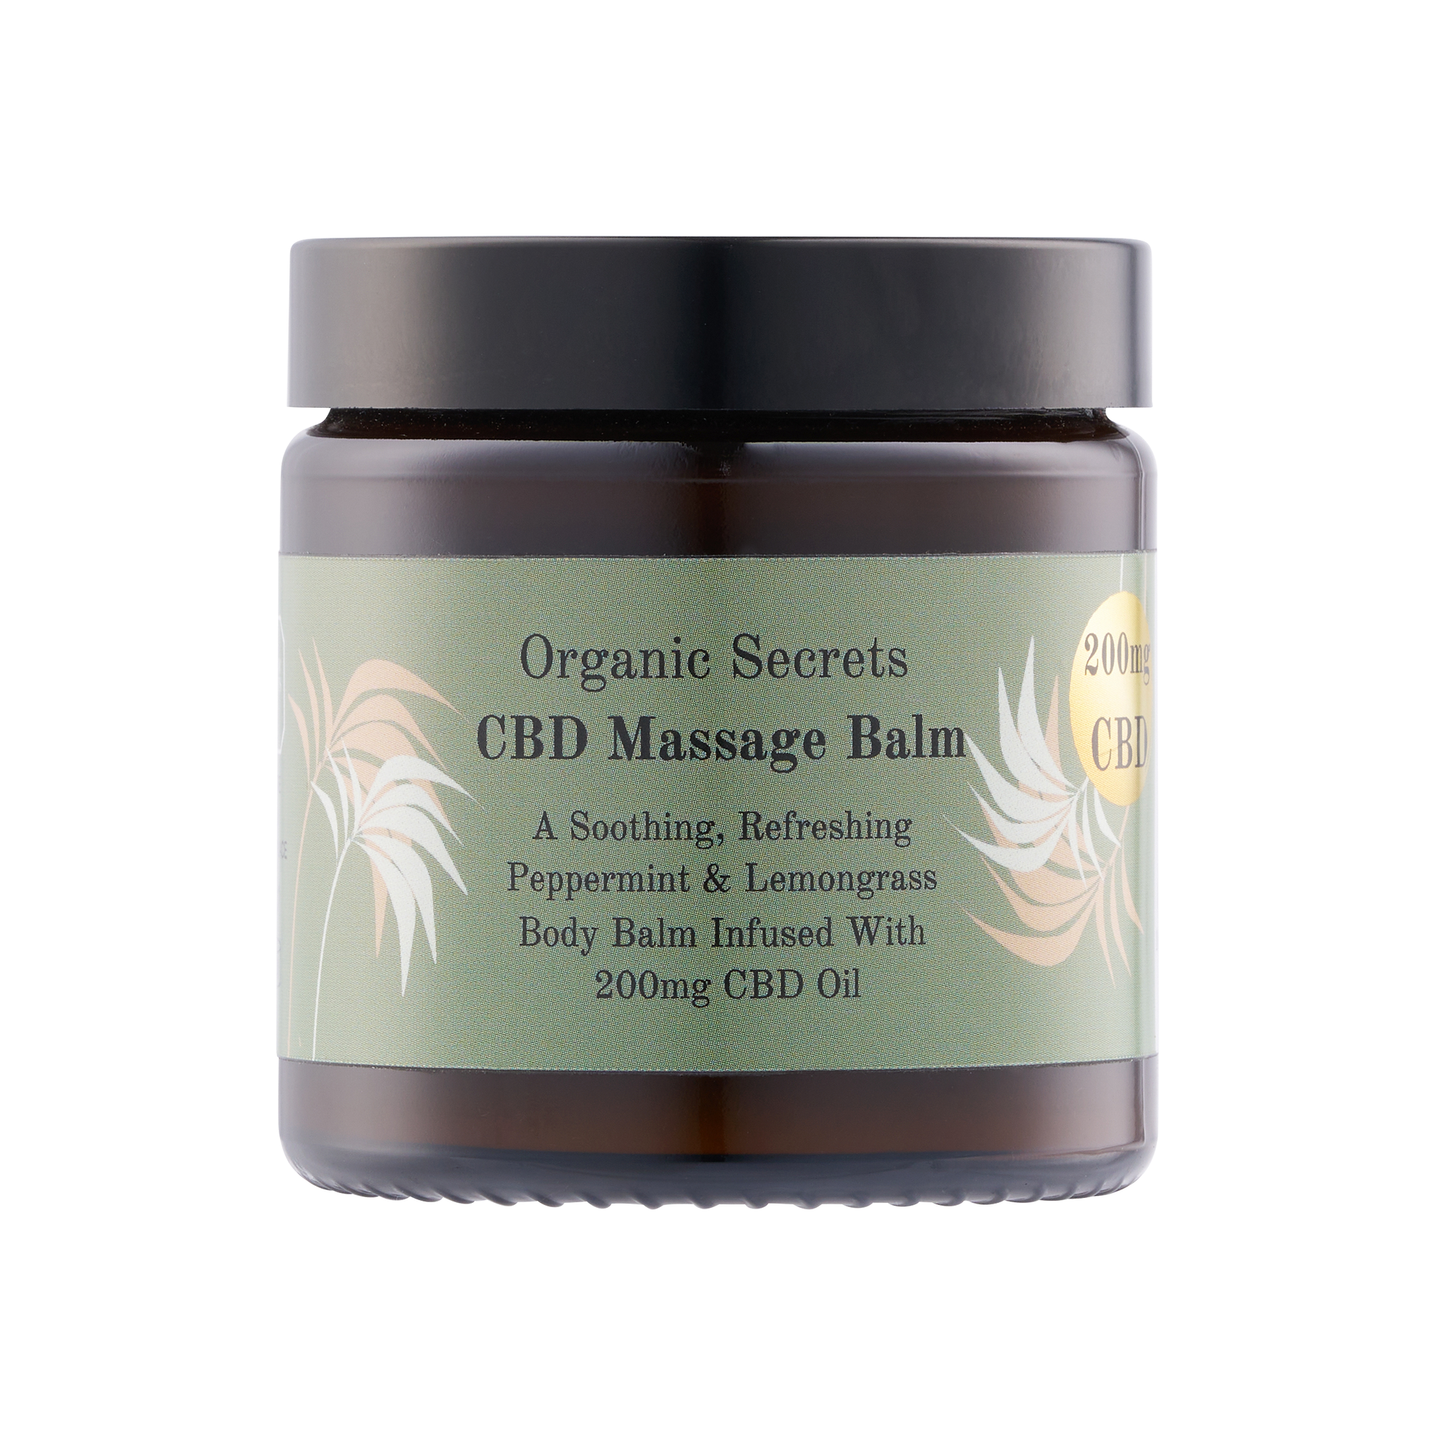 Lemongrass & Peppermint CBD Massage and Muscle Balm from Organic Secrets UK Ltd. Ideal choice to help with physical pain